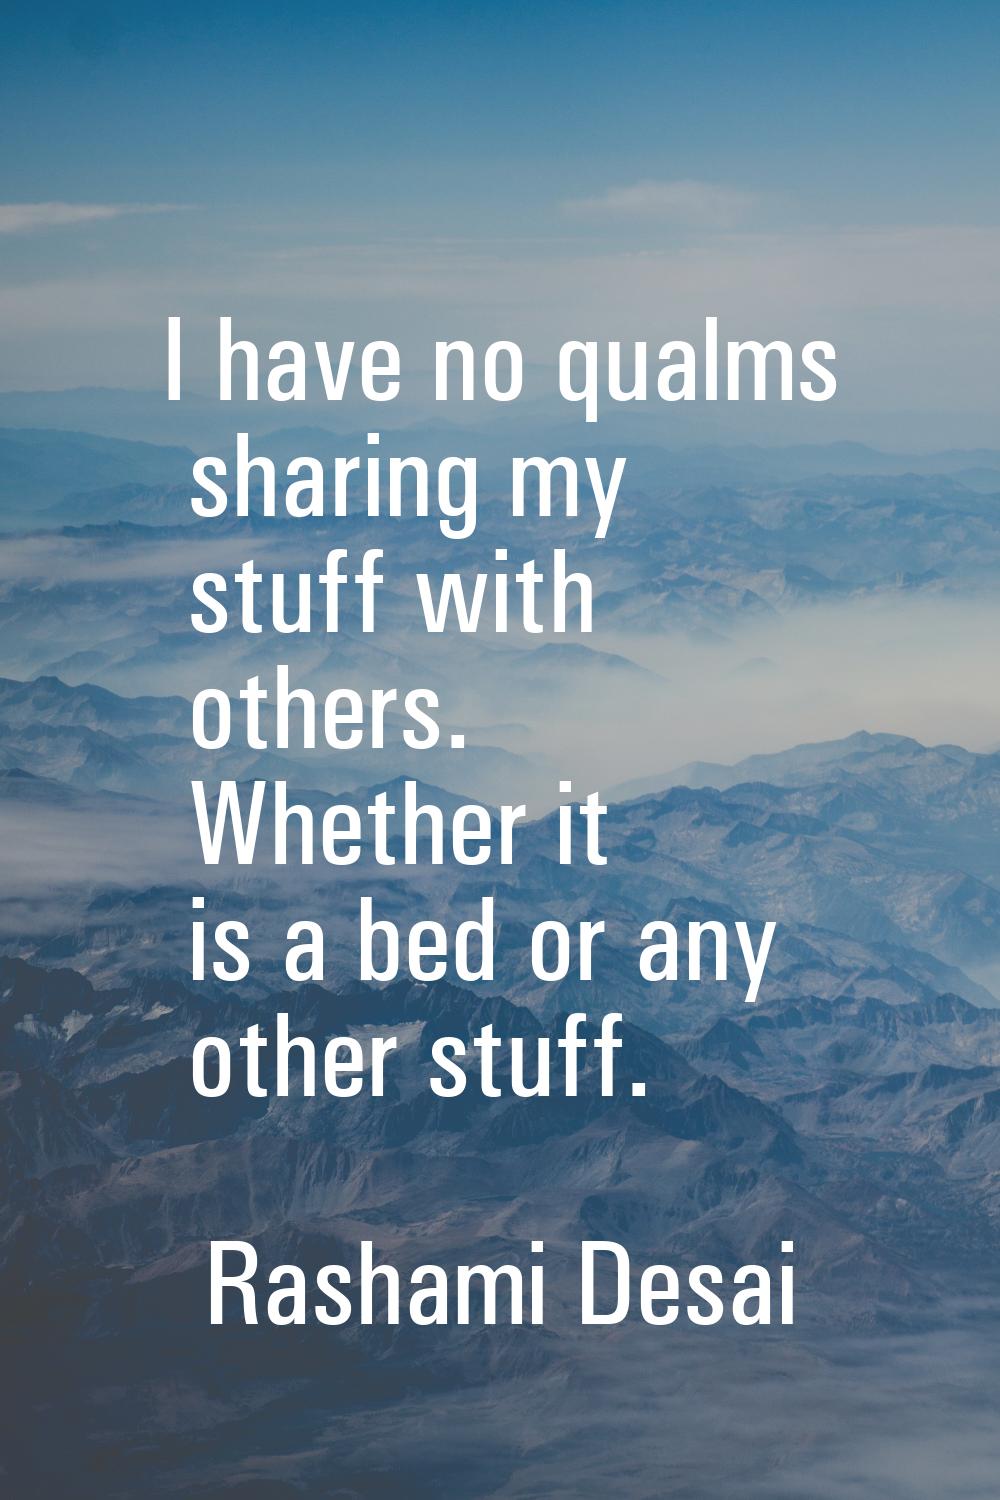 I have no qualms sharing my stuff with others. Whether it is a bed or any other stuff.